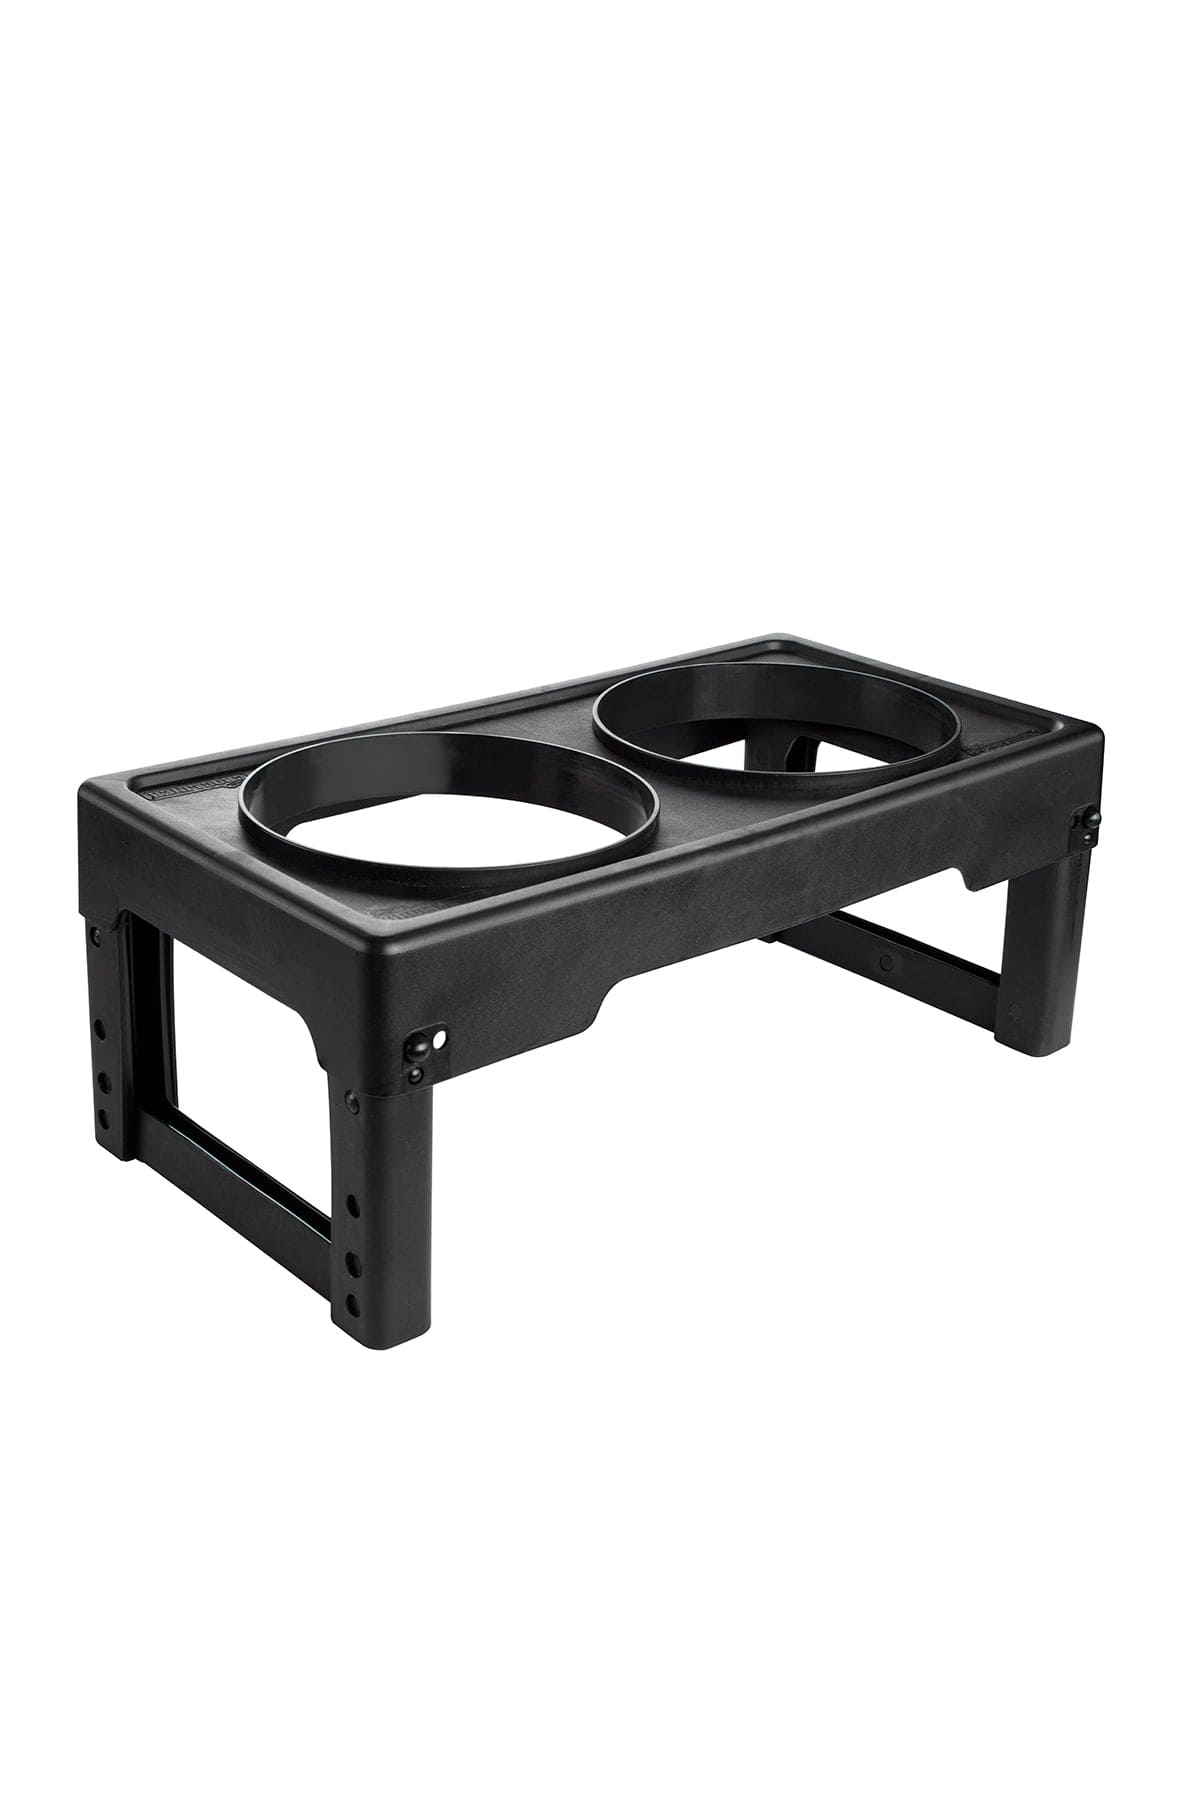 Adjustable Elevated Pet Bowl Stand without the bowls.